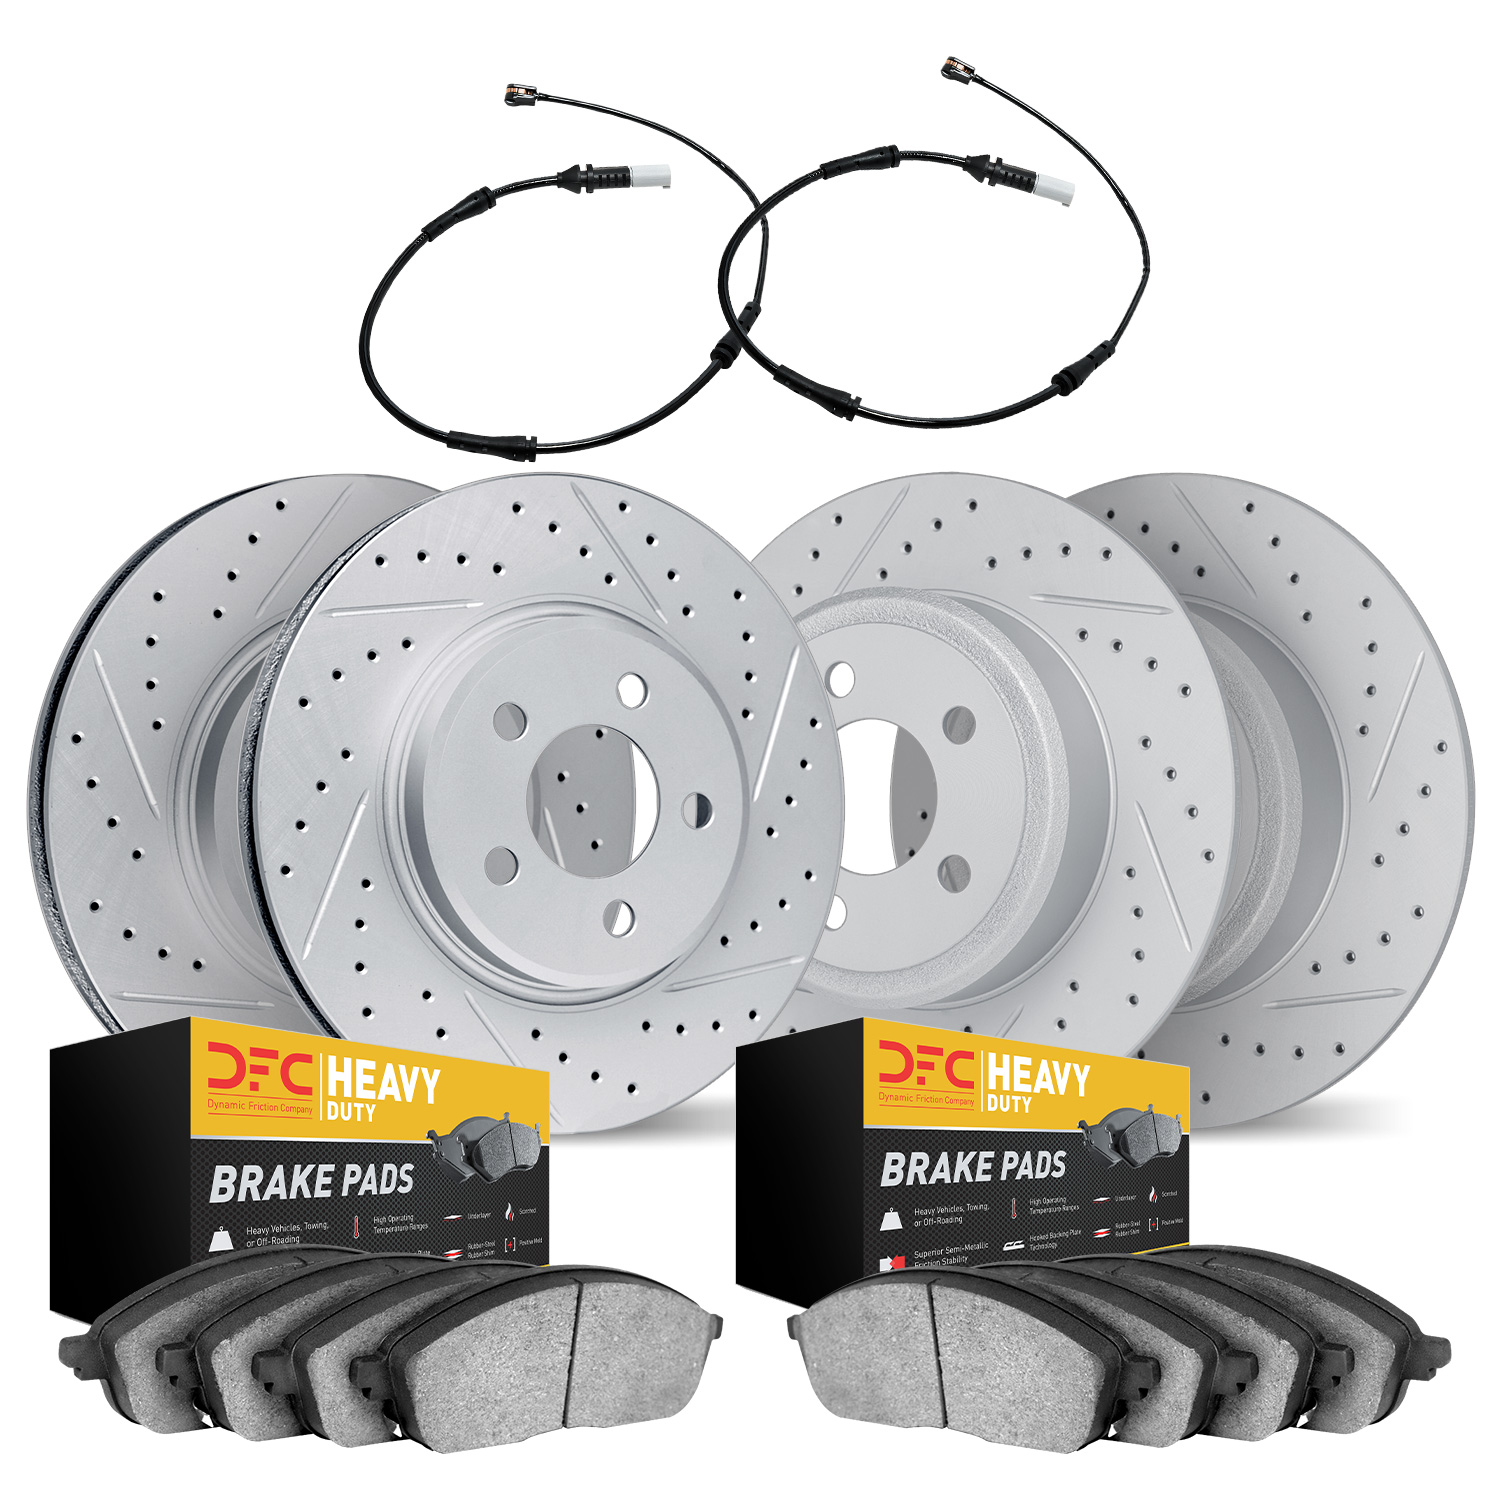 2234-40001 Geoperformance Drilled/Slotted Rotors w/Heavy-Duty Pads Kit & Sensor, 2002-2006 Multiple Makes/Models, Position: Fron